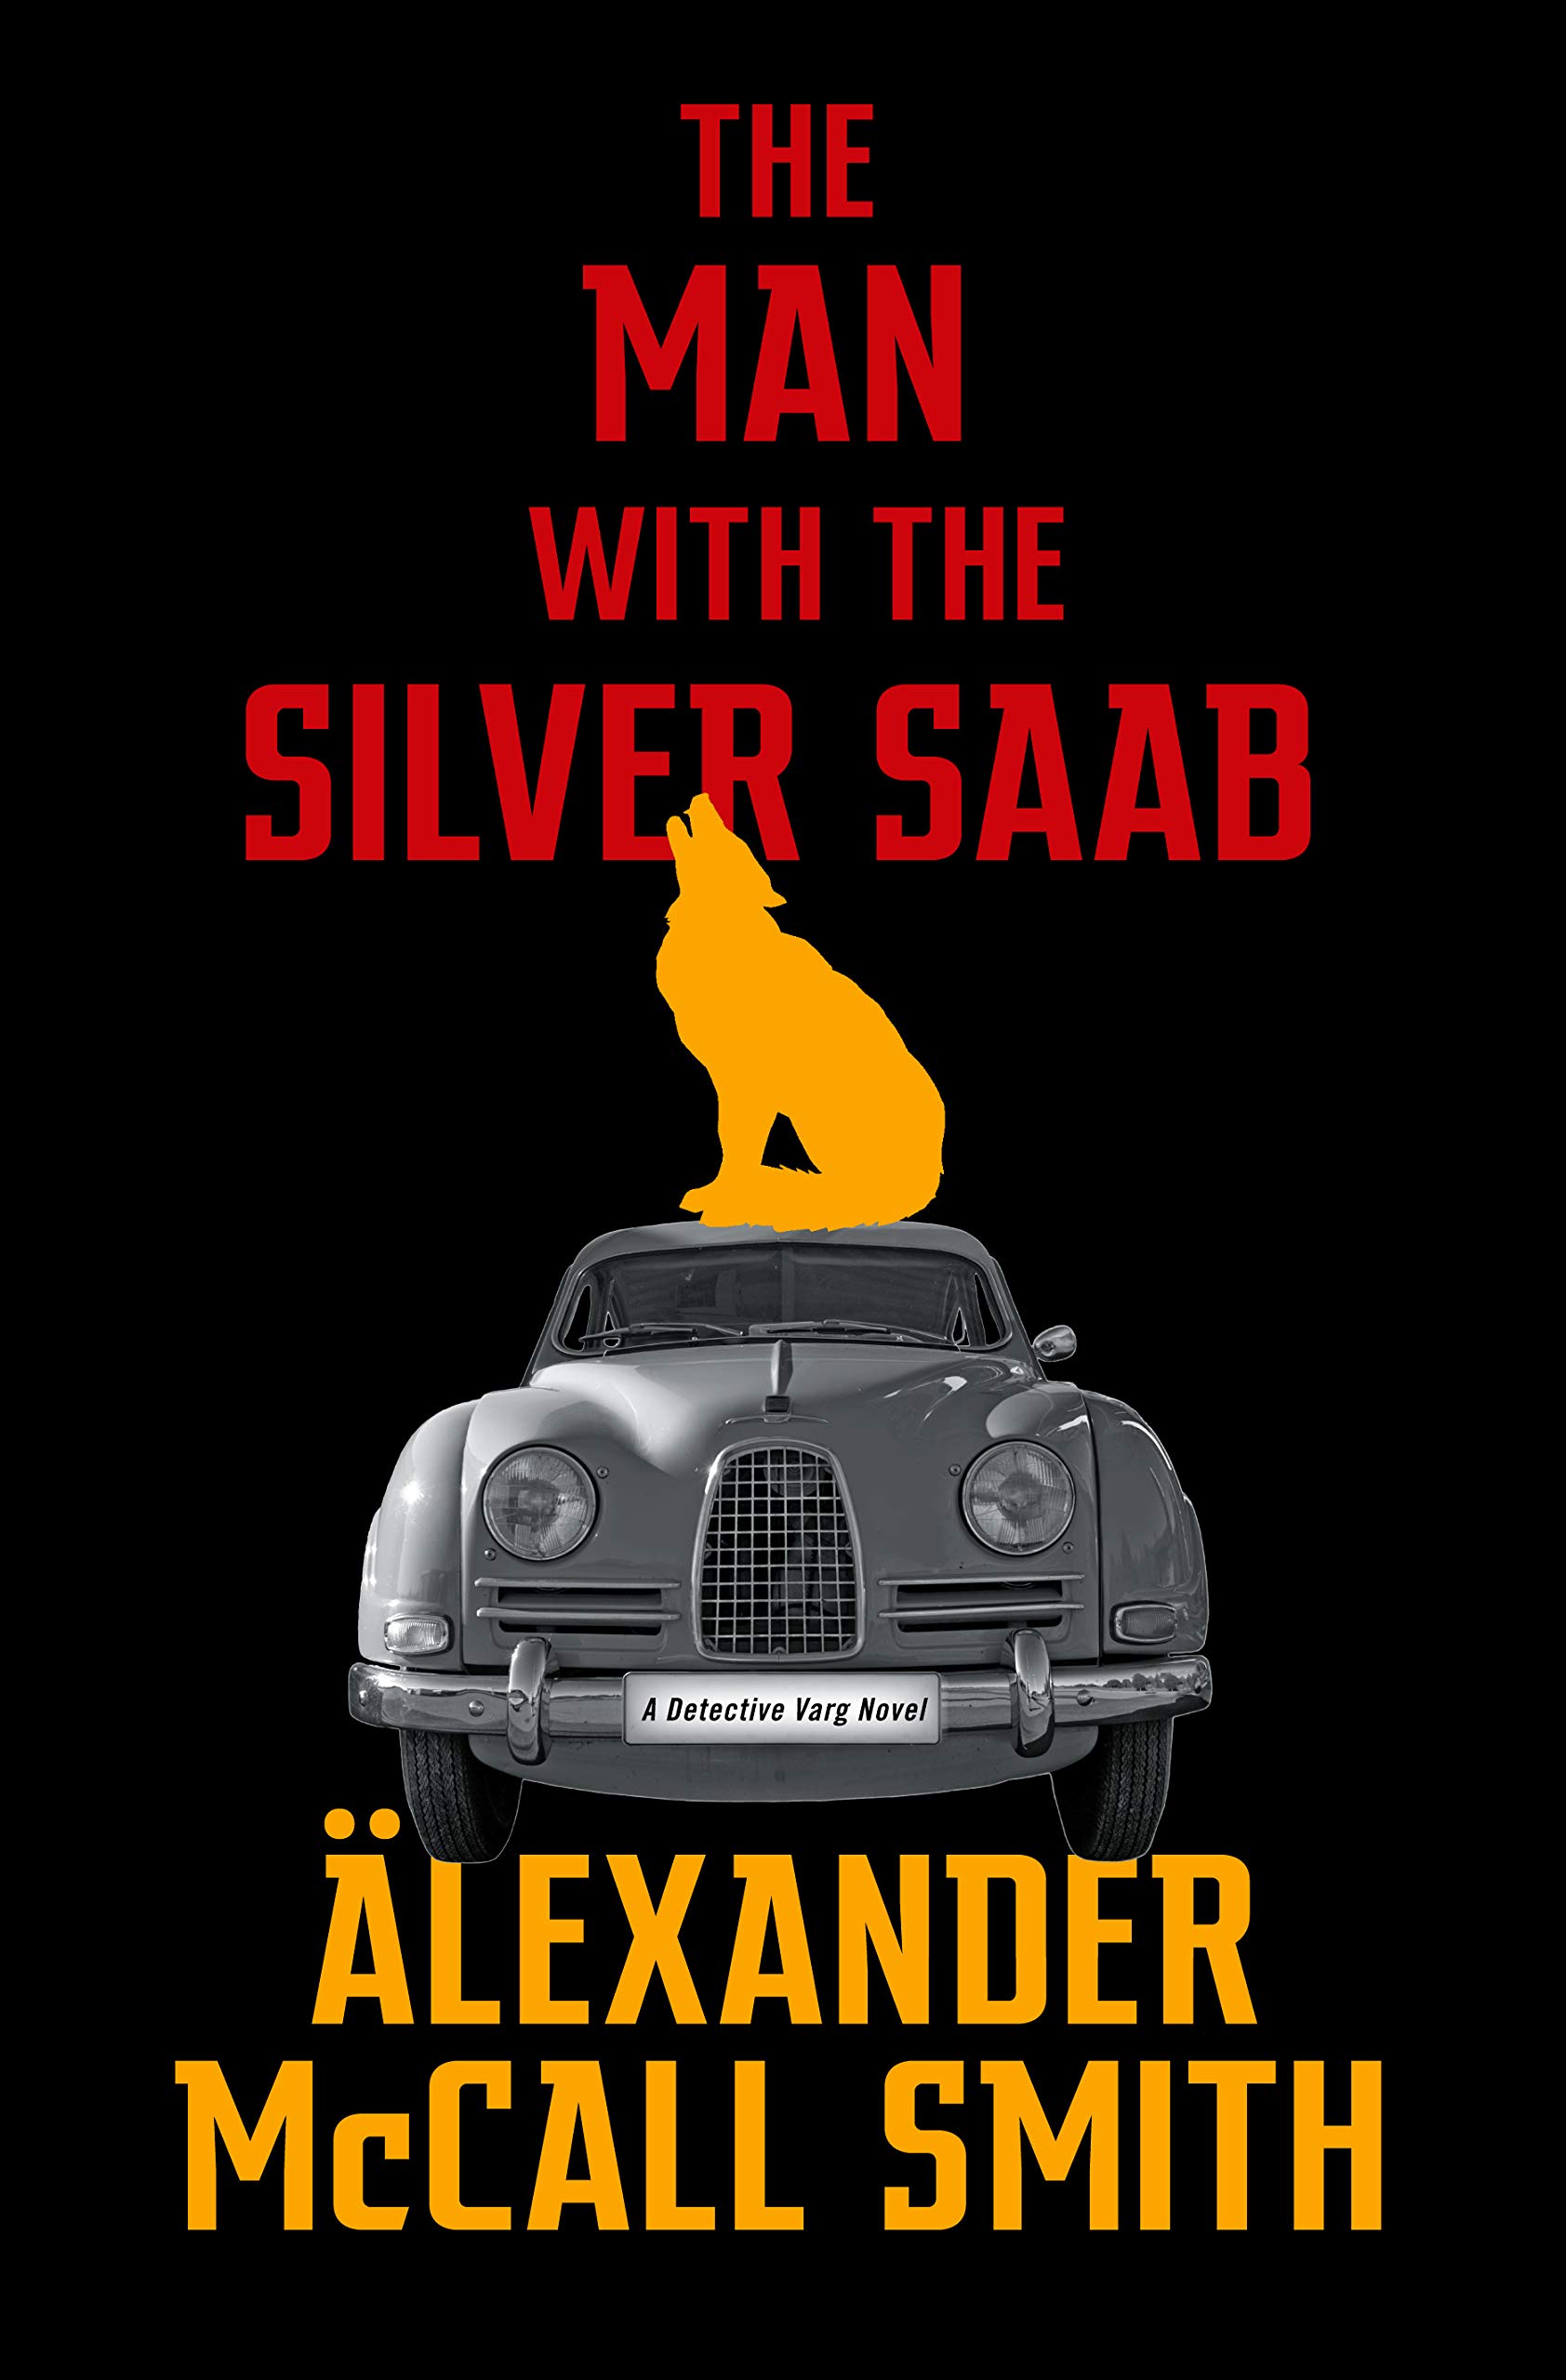 Image for "The Man in the Silver Saab"